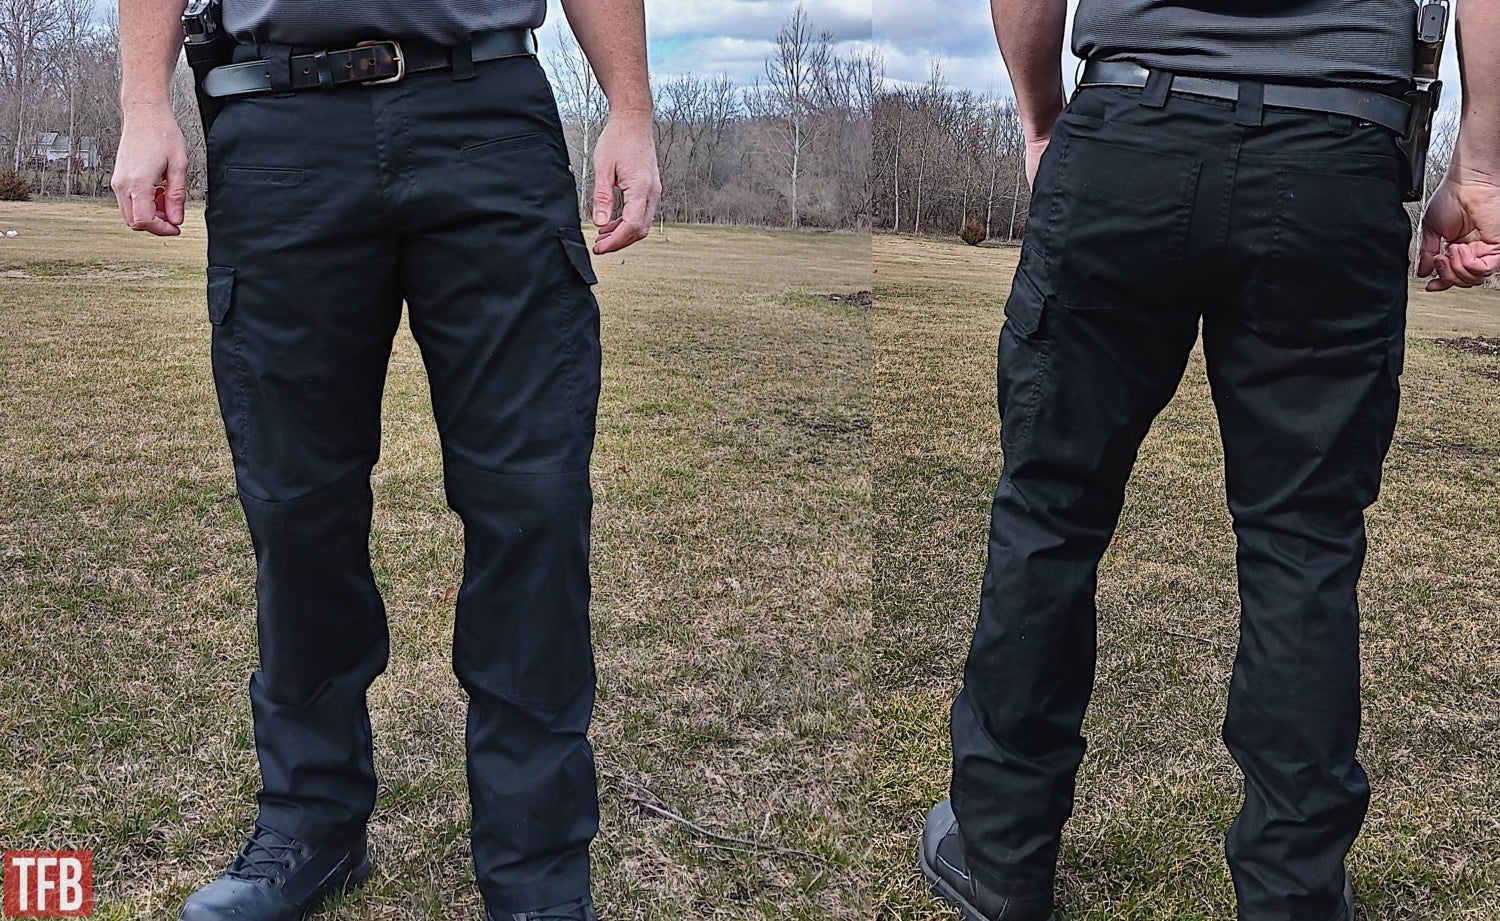 Features: 65% Polyester/35% Cotton Rip-Stop Fabric Fabric Weight: 8.1 oz Athletic Fit - more modern, less baggy Classic tac-stud button waist with brass locking YKK zipper 12 pocket design (see above for details) Tuxedo-style elastic waistband Interior knee pad pockets An excellent option for duty, tactical, or CCW High end stitching with bar tacks in key areas Gusseted crotch 7 total belt loops that fit up to a 2 1/4" belt